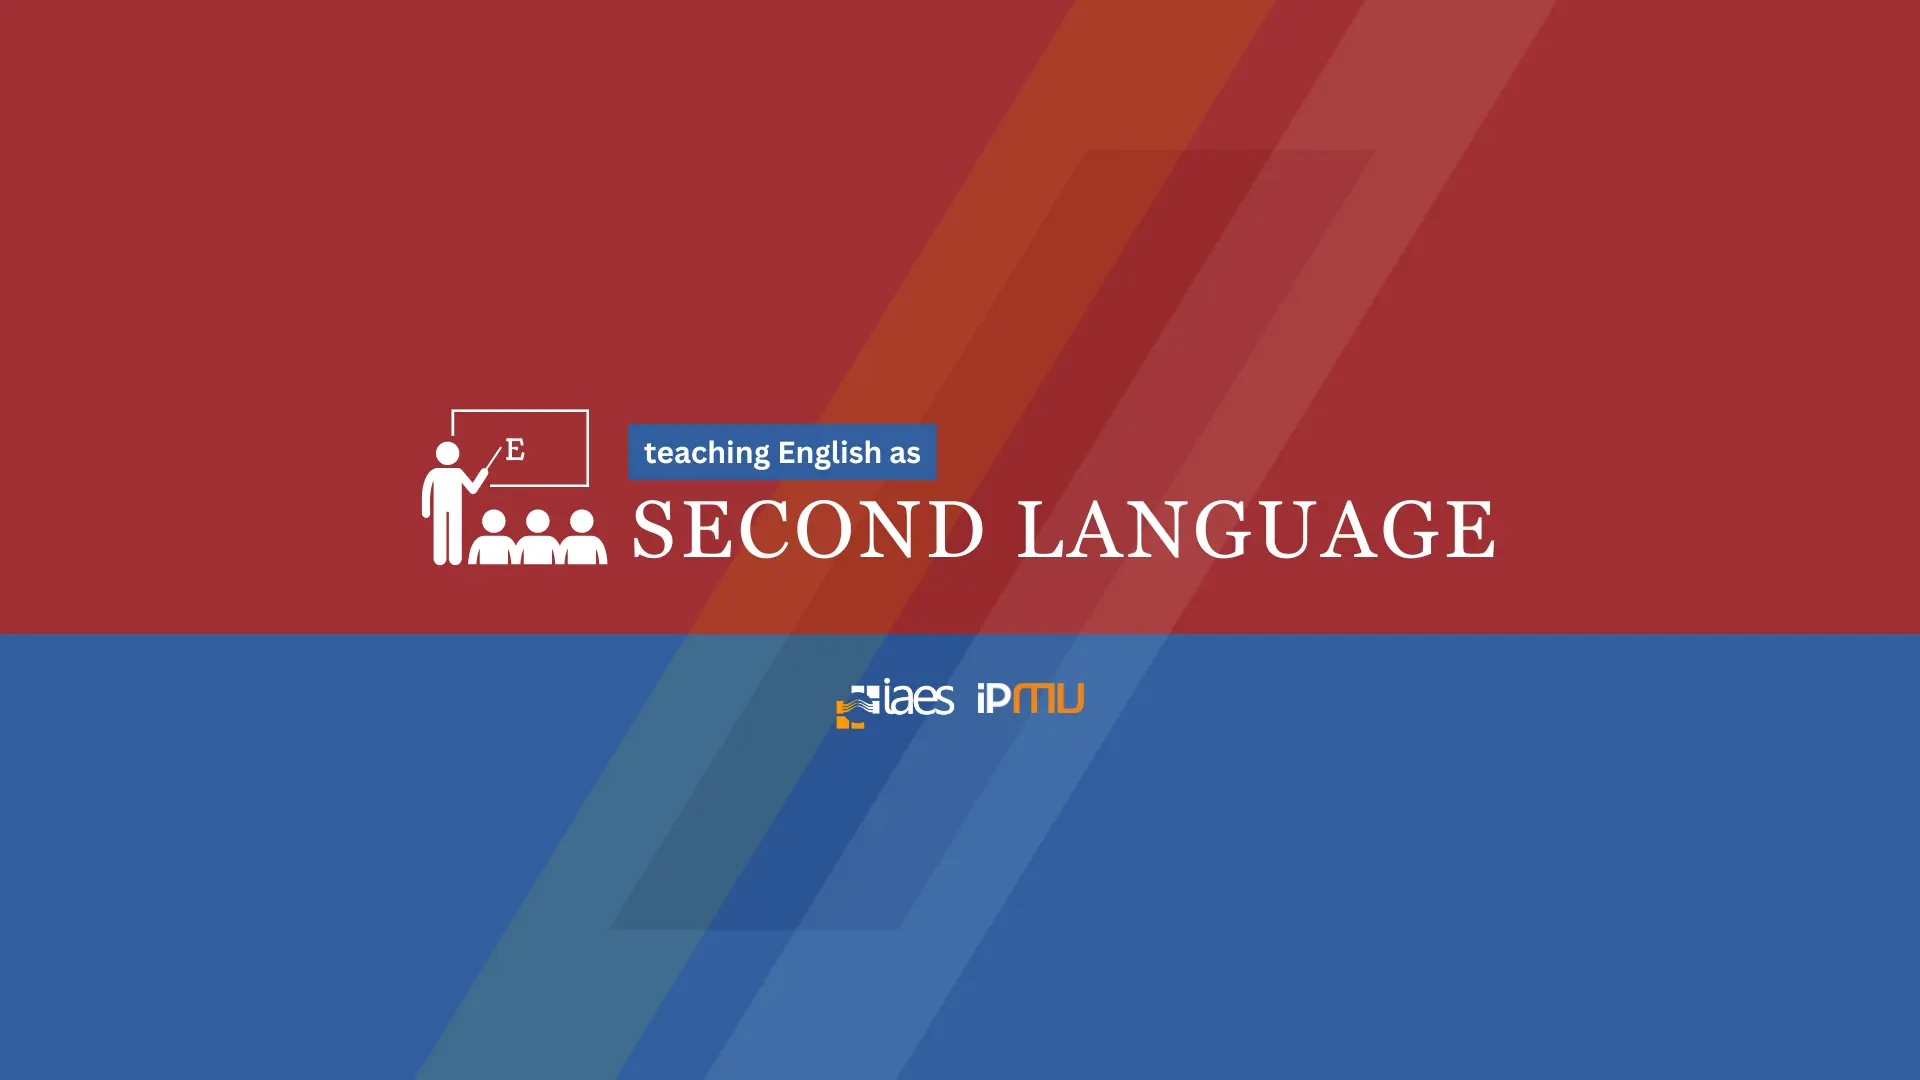 Teaching English as Second Language: challenge and expectation for the teacher